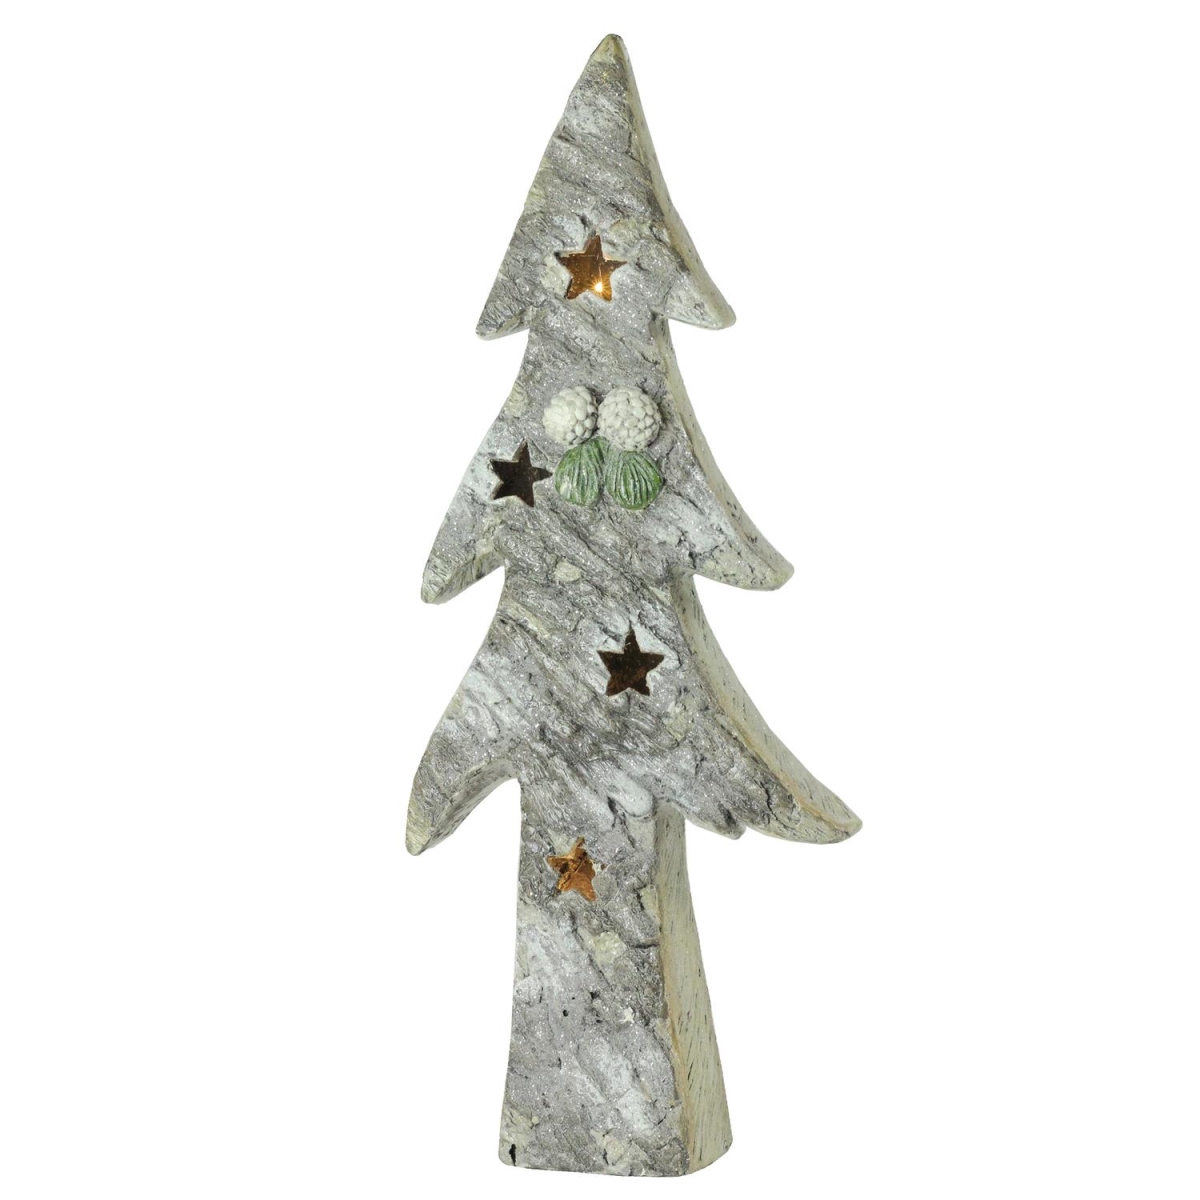 32633441 30 In. Led Lighted Battery Operated Rustic Glittered Christmas Tree Table Top Decoration